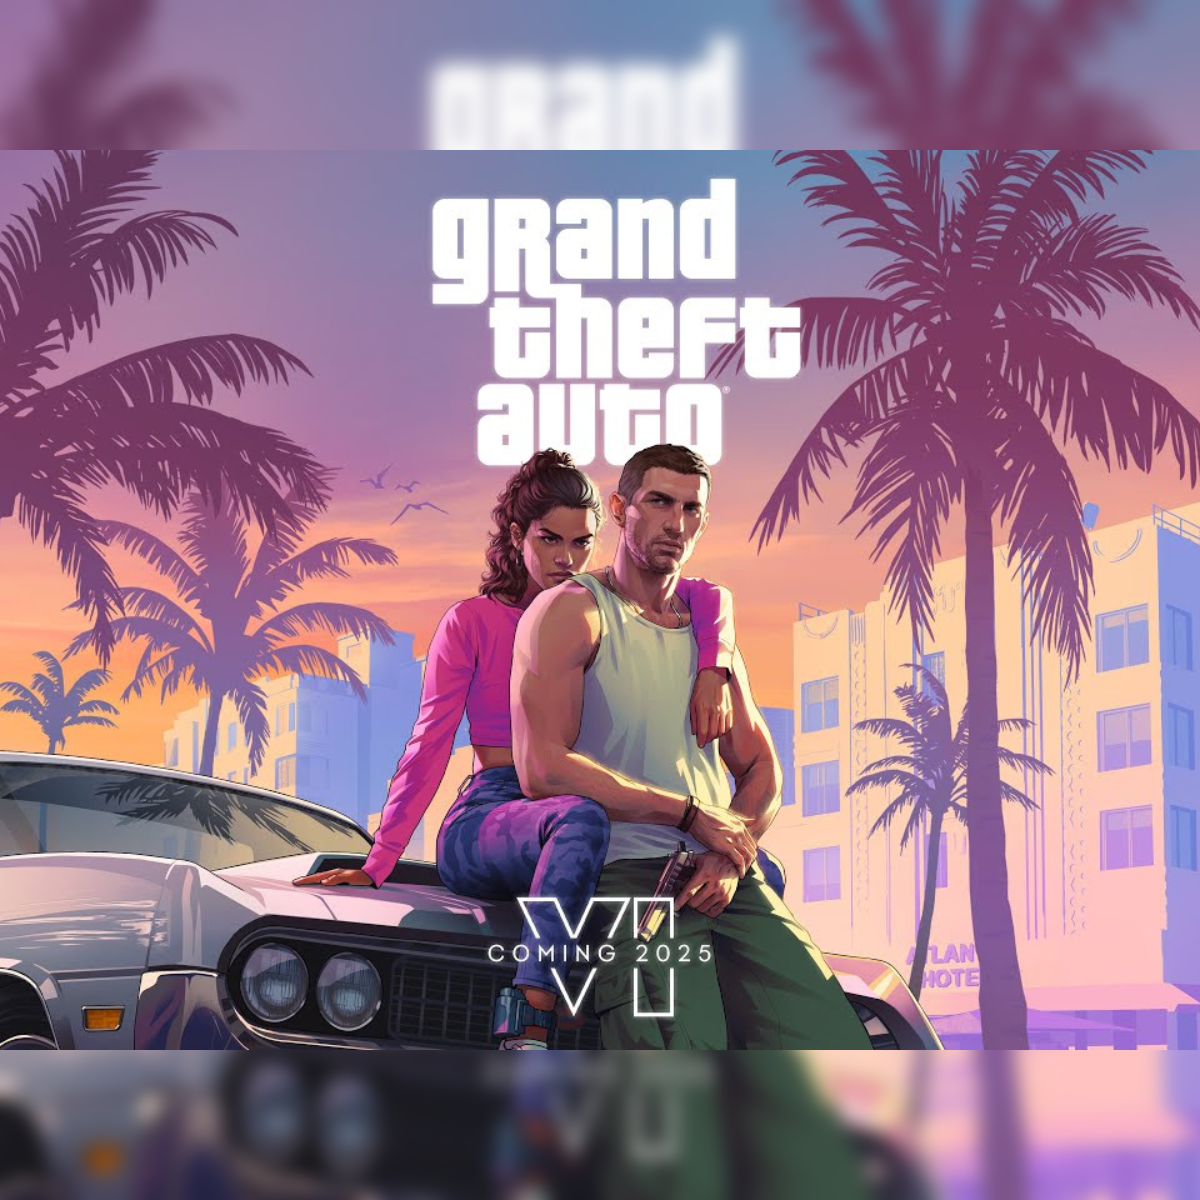 GTA 6 fans frustrated over GTA Online 2 'cost' update